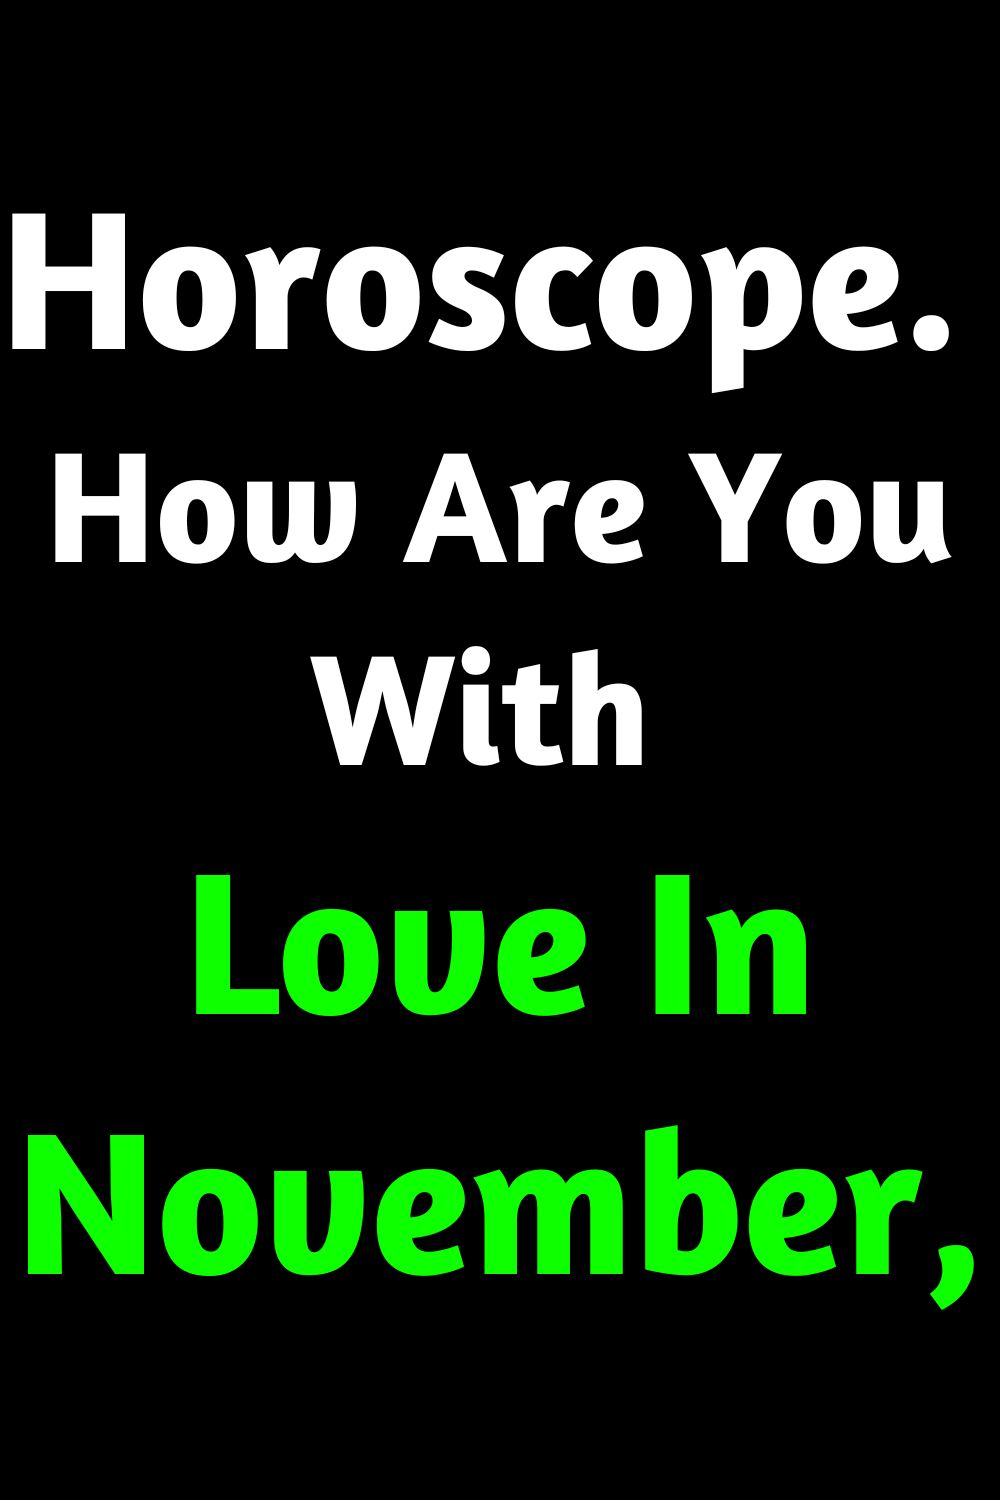 Horoscope. How Are You With Love In November, Depending On Your Sign